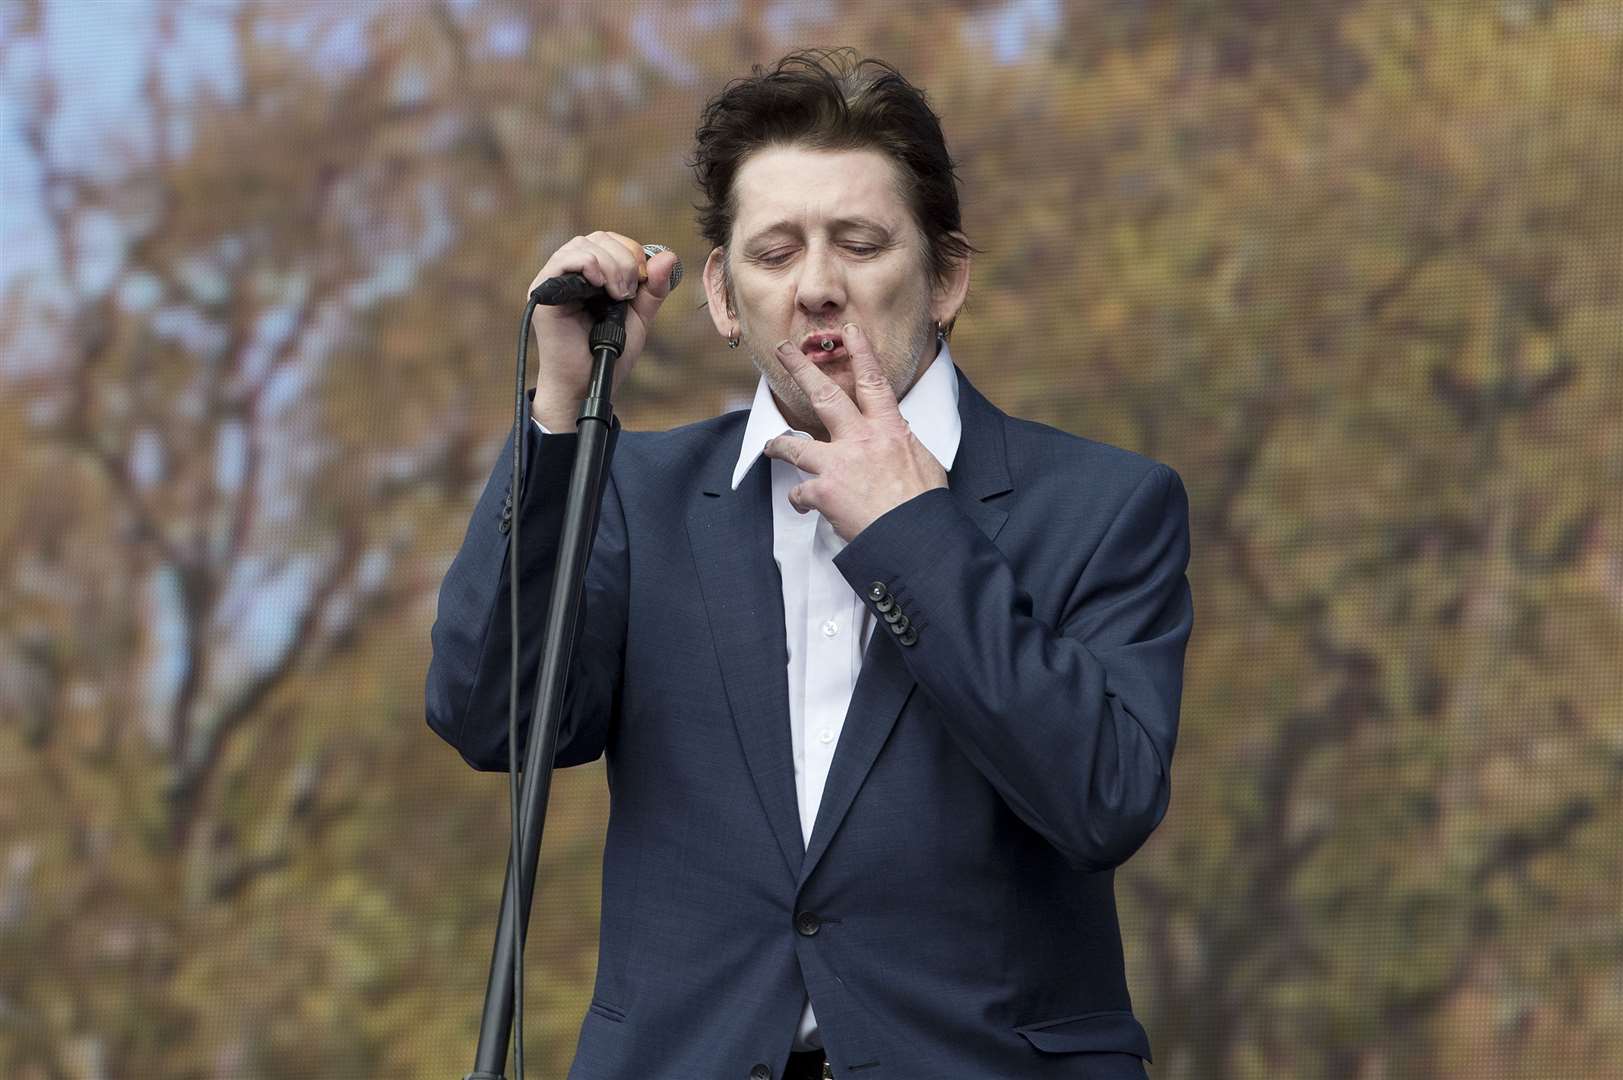 Shane MacGowan lead singer of The Pogues as the band performs at the Barclaycard British Summer Time Festival in Hyde Park, London (Laura Lean/PA)